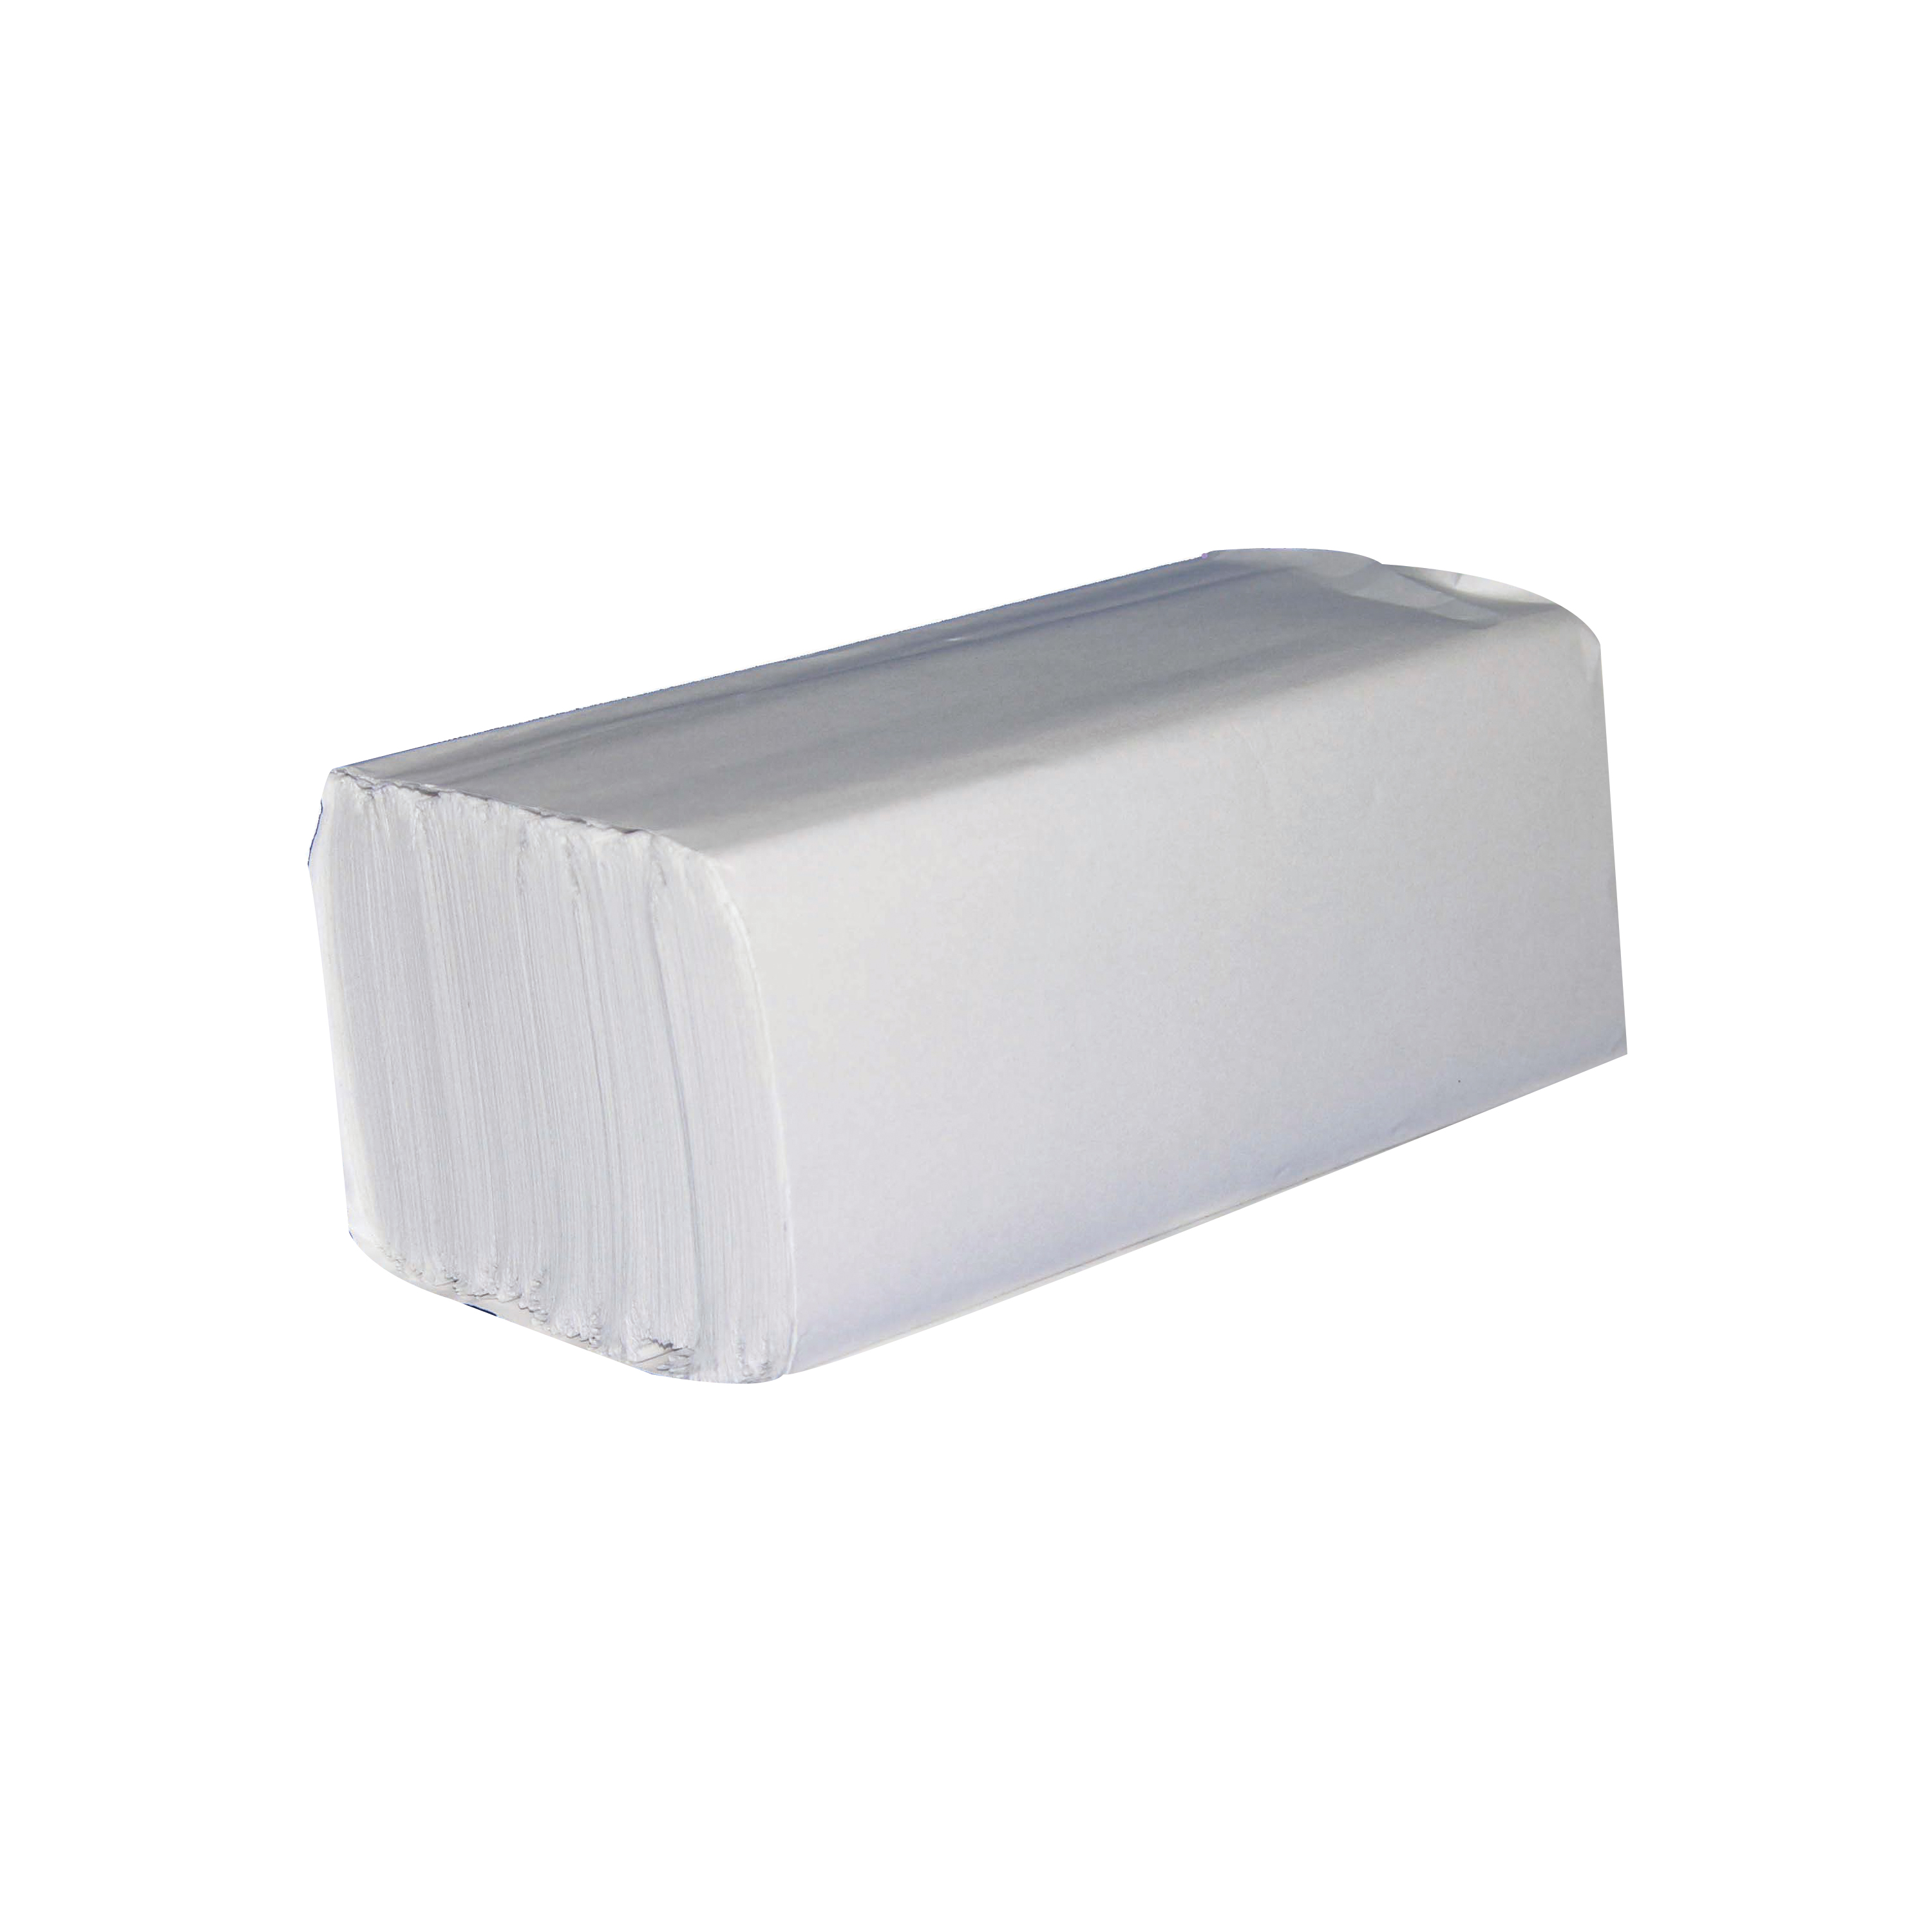 Lens Cleaning Tissues - 6" x 5"